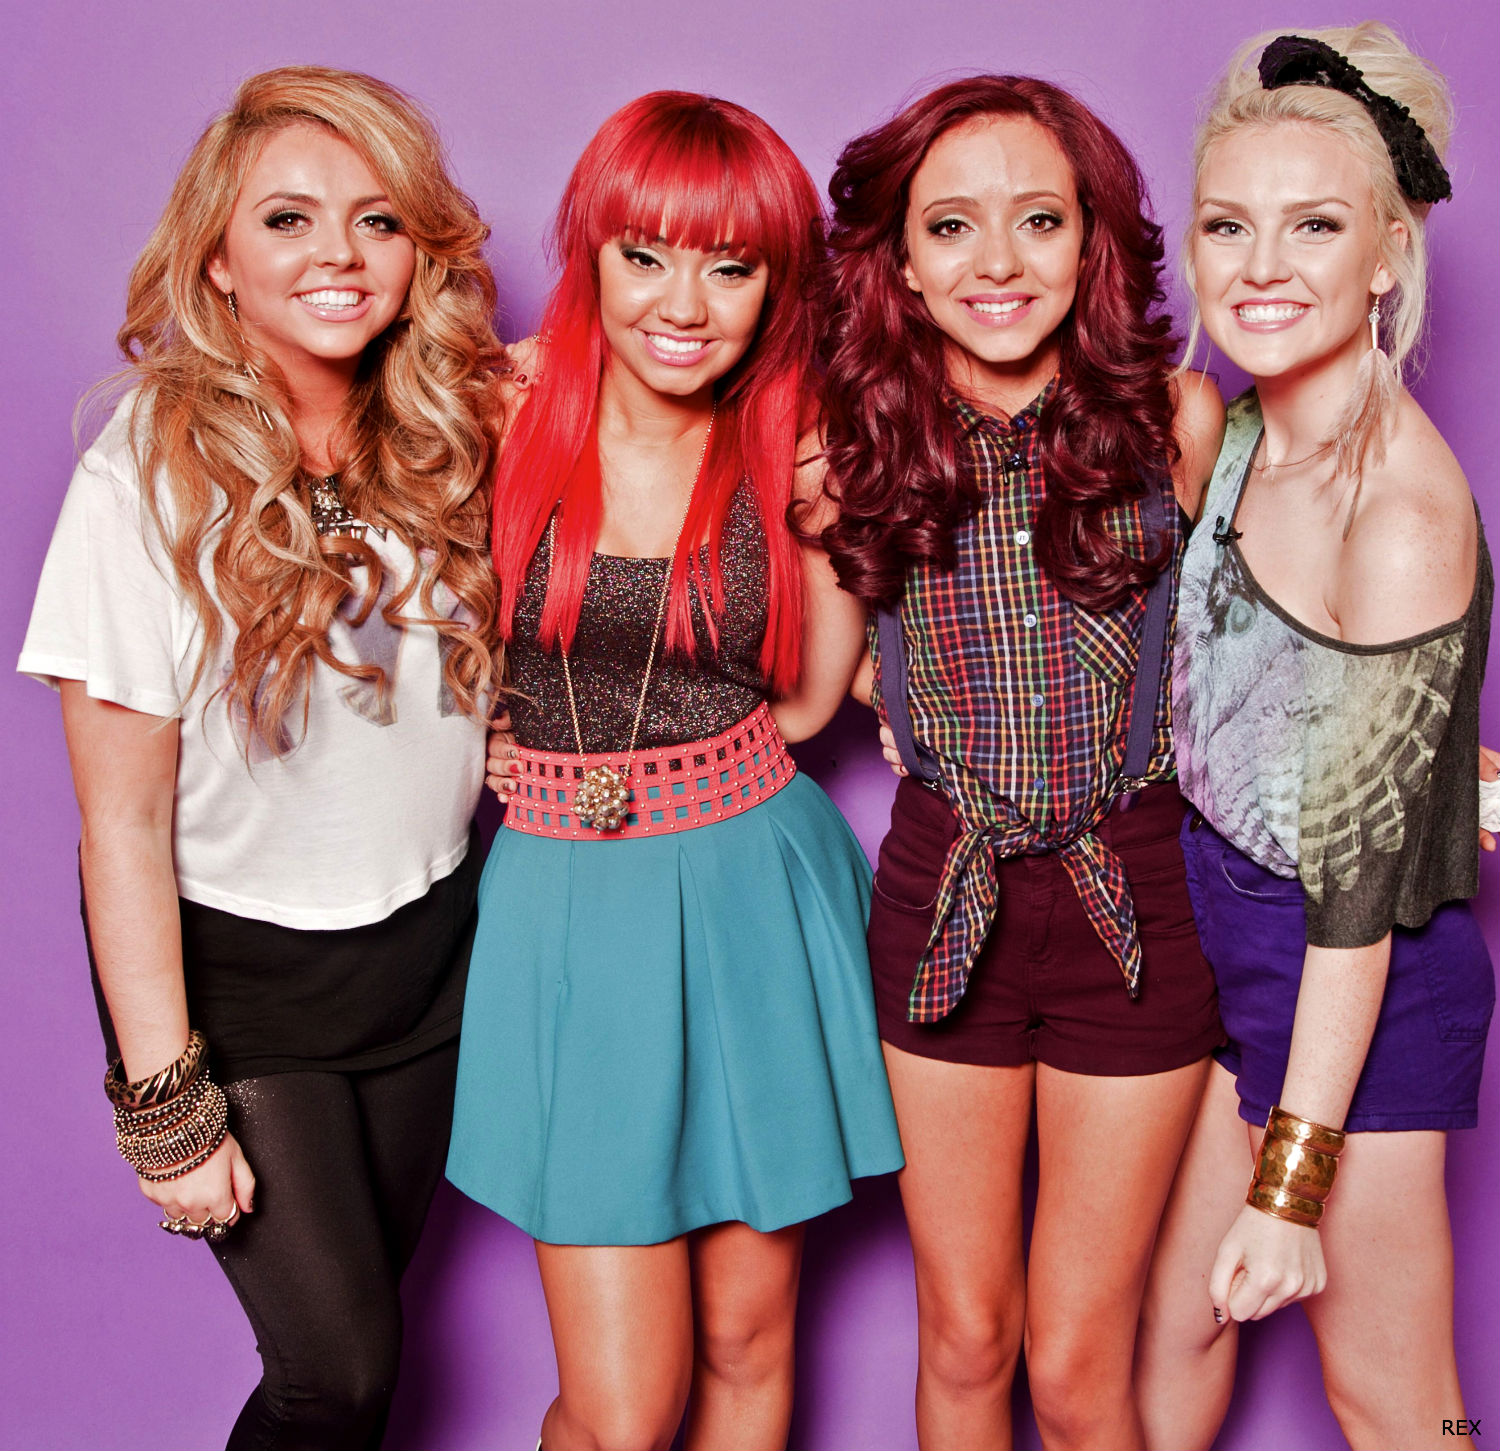 Little Mix Style File 